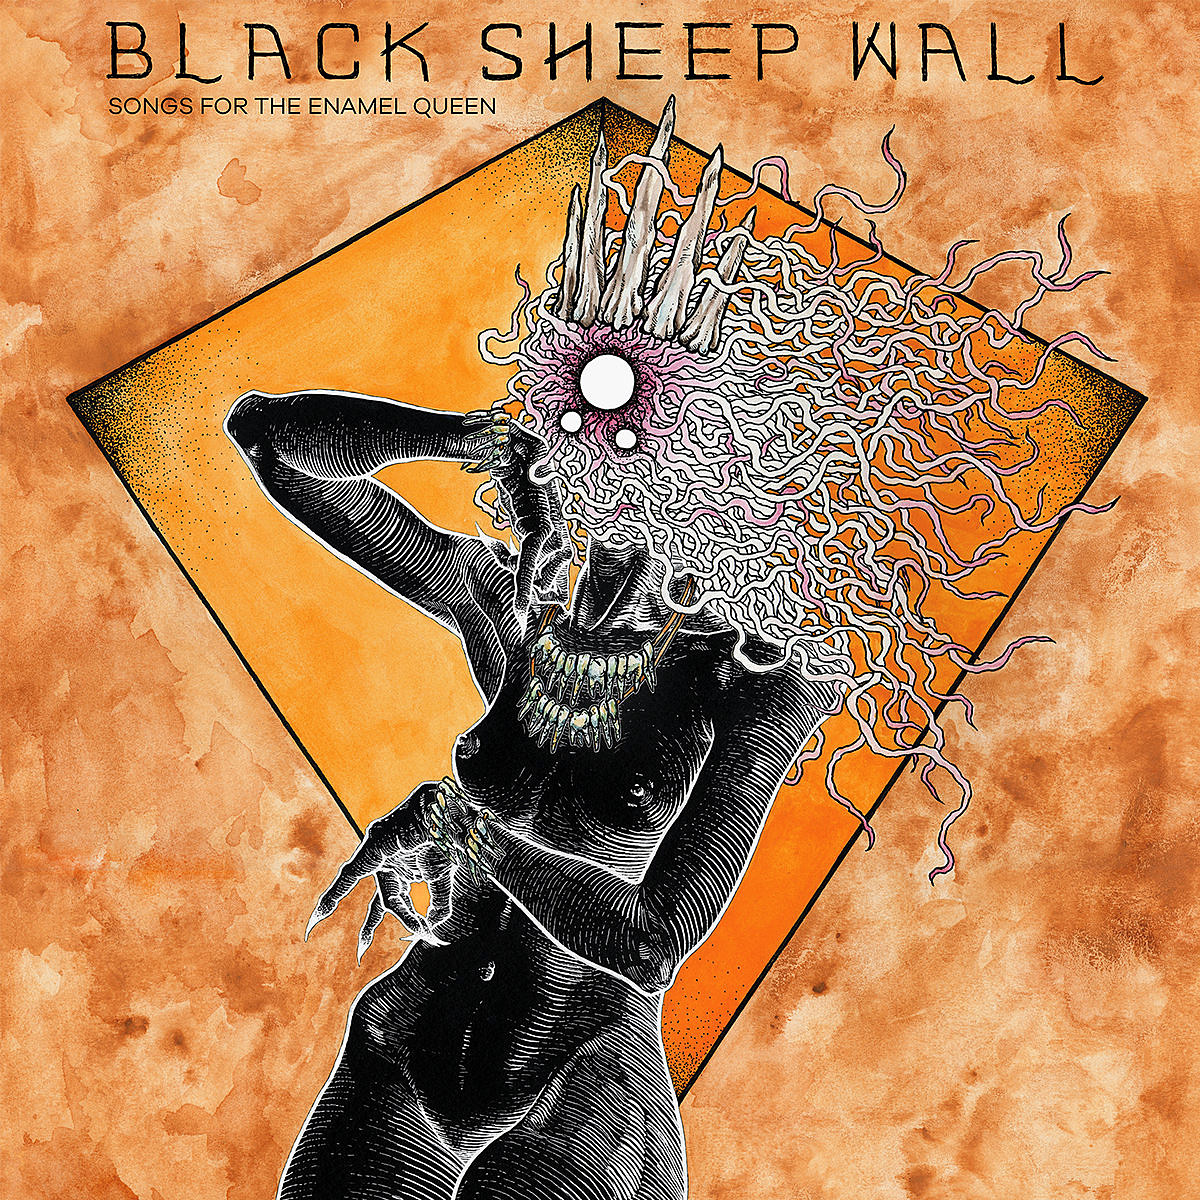 Black Sheep Wall Songs for the Enamel Queen